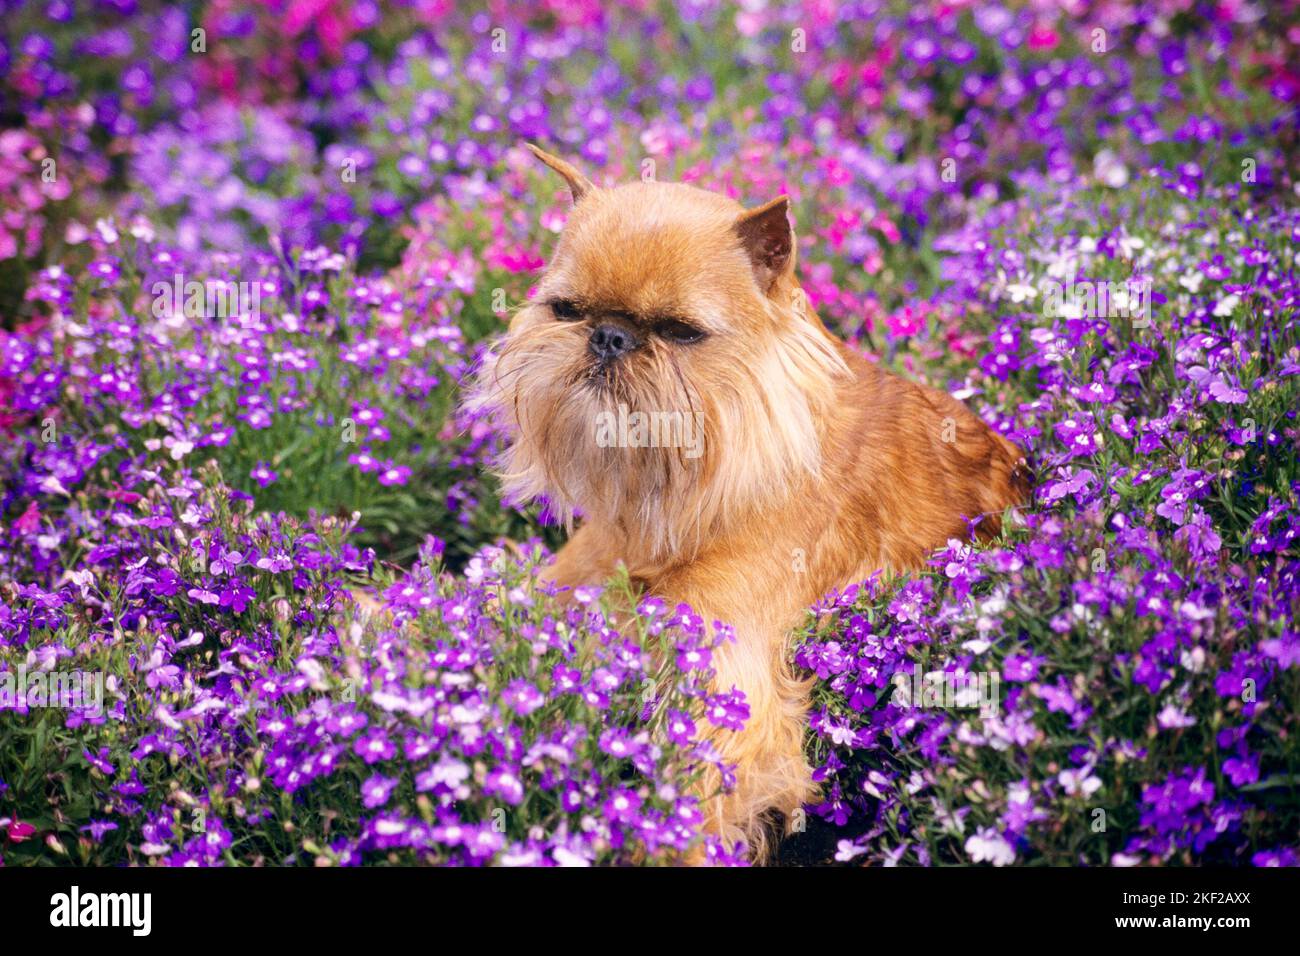 1990s BRUSSELS GRIFFON A BROWN GRIFFON BRUXELLOIS TOY DOG WITH BEARD AND CROPPED EARS SITTING IN A FLOWERS BED - kd6698 HFF002 HARS TOY DOG Stock Photo